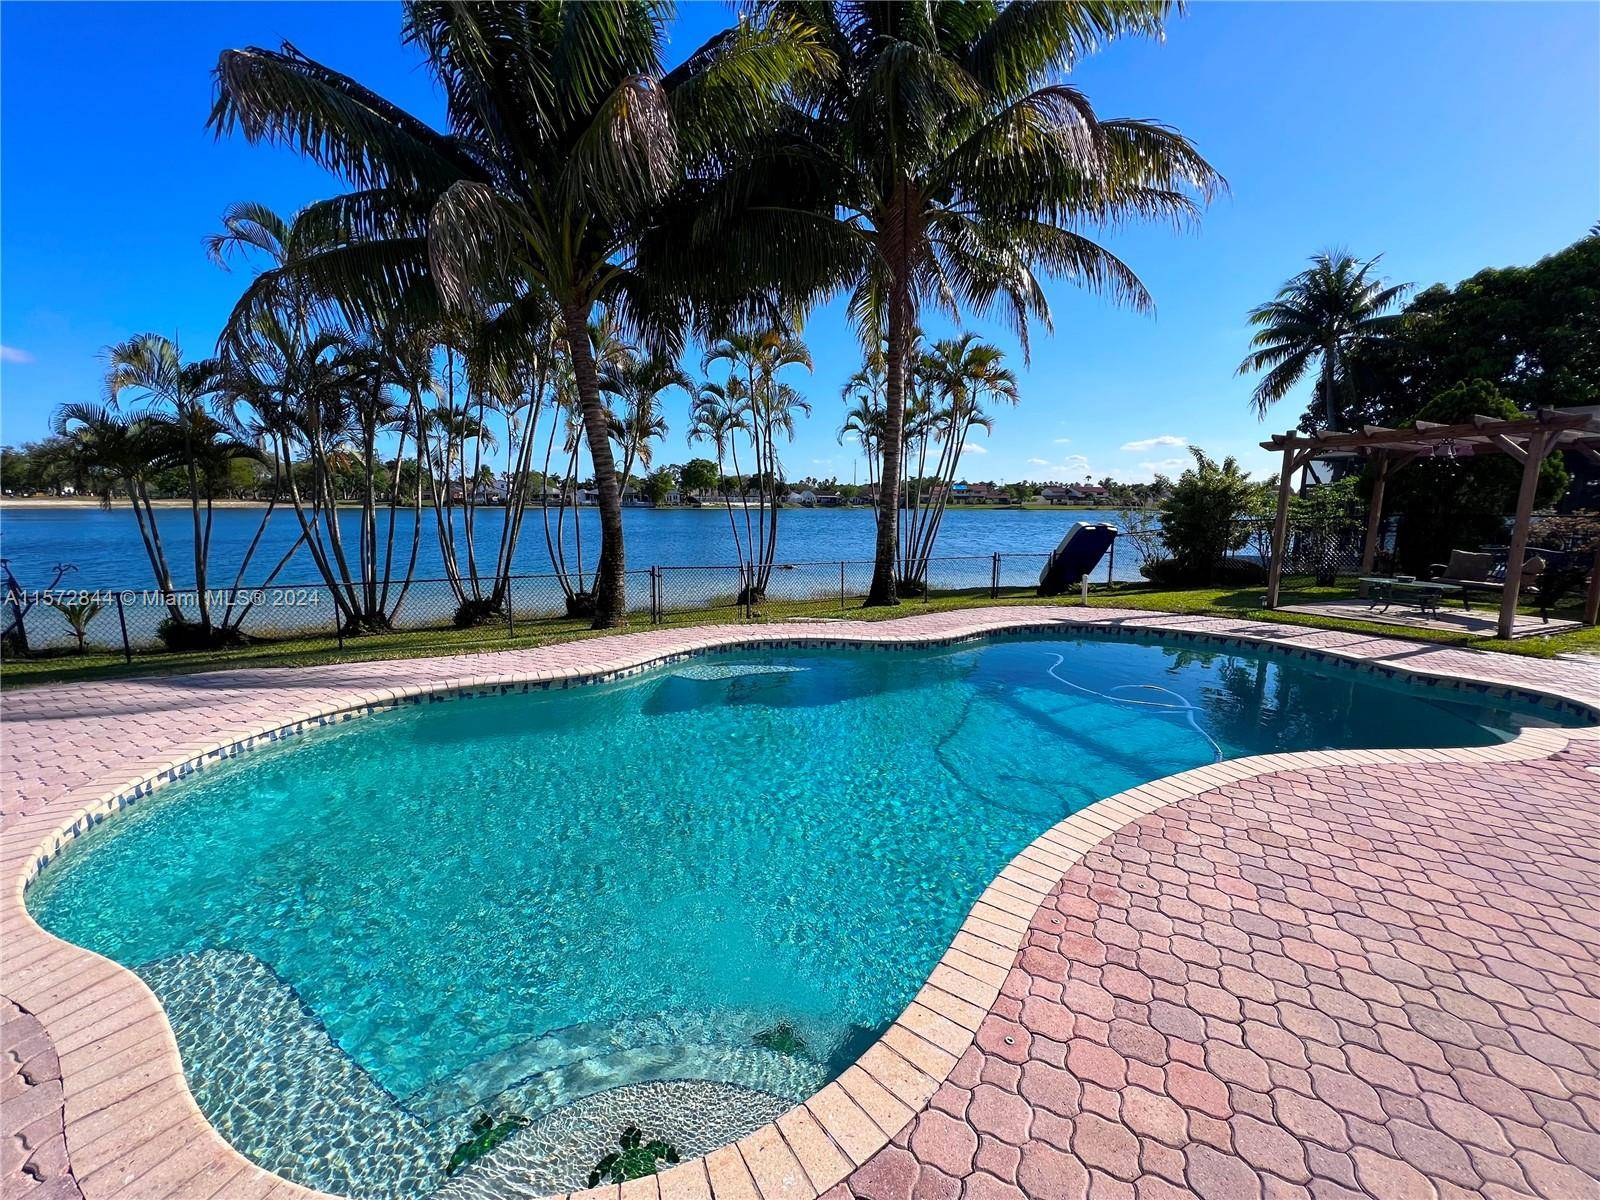 Spacious Lake front house for sale, this 4 bed 2 bath Pool and Lake front home with a 2 car garage is located in the safe and quiet neighborhood of ...